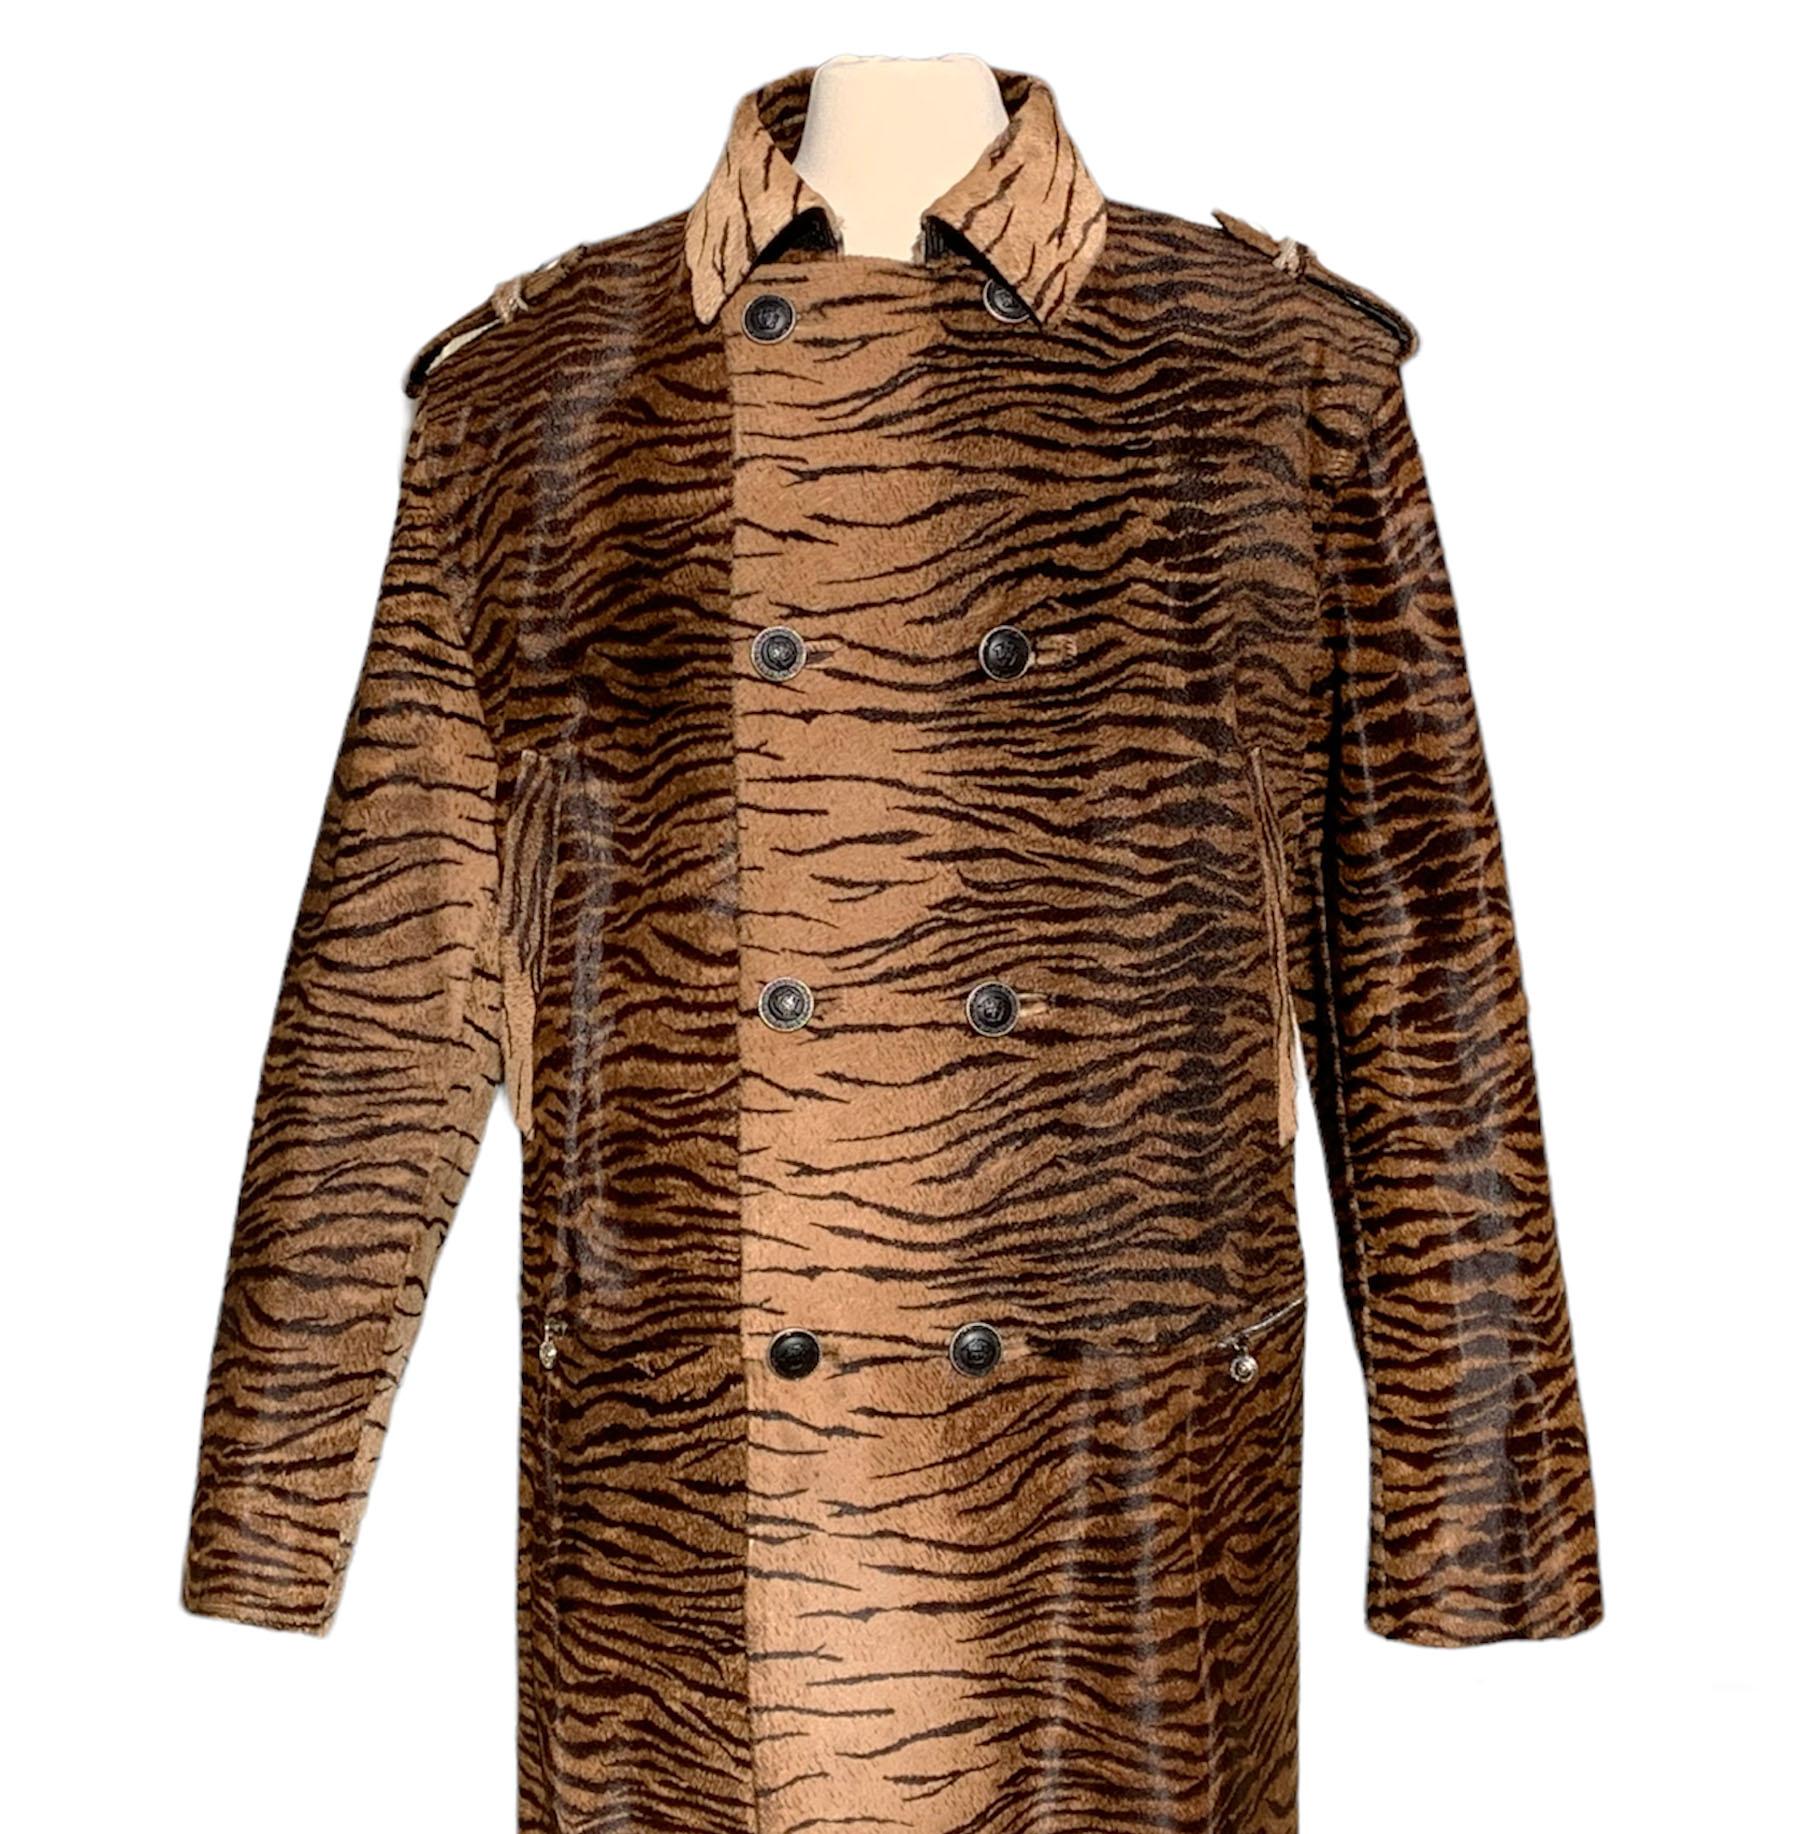 NWT Vintage Gianni Versace Zebra Print Fur Leather Men's Coat Italian 56  US 46 In New Condition For Sale In Montgomery, TX